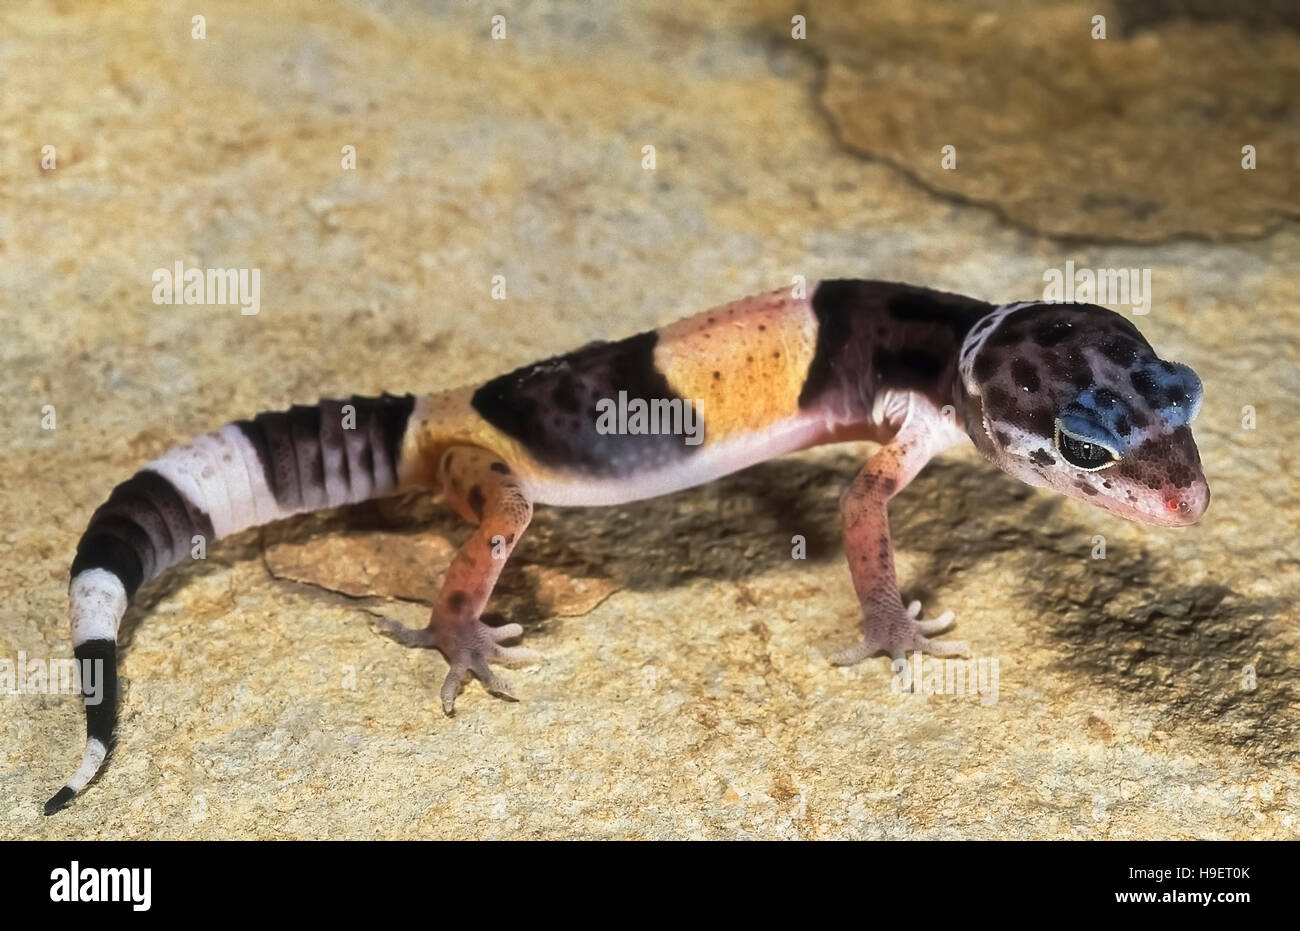 WESTERN INDIAN LEOPARD GECKO Eublepharis fuscus JUVENILE from near Jejuri, Maharashtra, India. Inhabits dry scrub and rocky areas. Feeds on insects Stock Photo